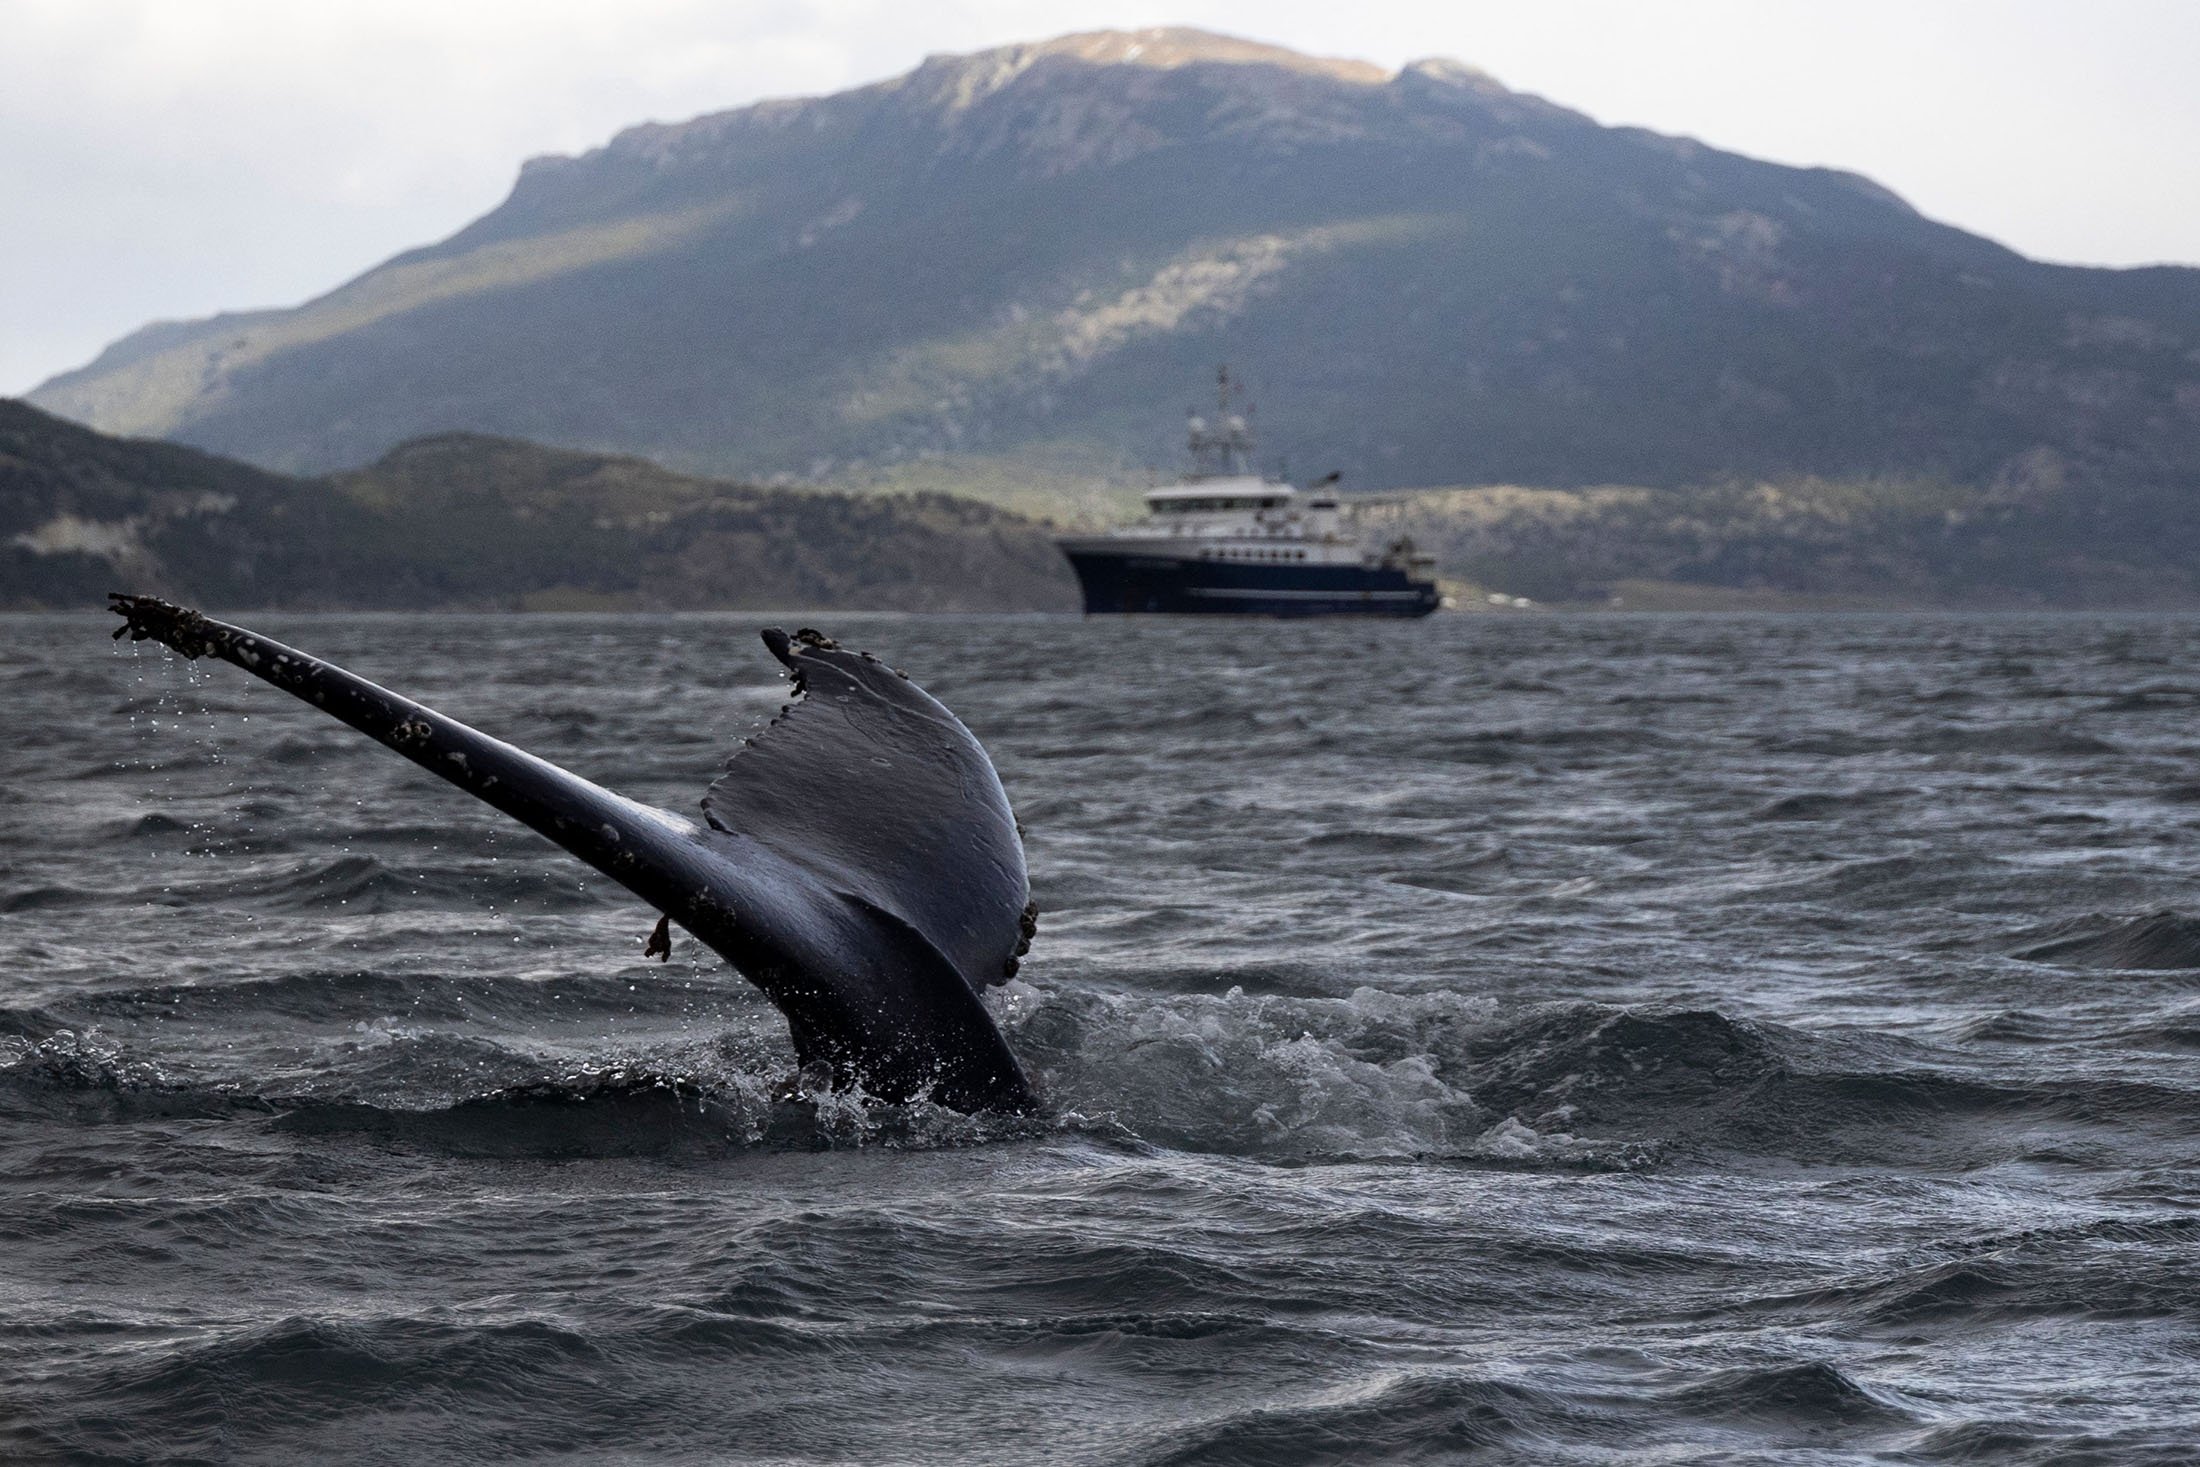 A humpback whale is seen at the Beagle Channel, Chile, Nov. 29, 2021. (AFP Photo)